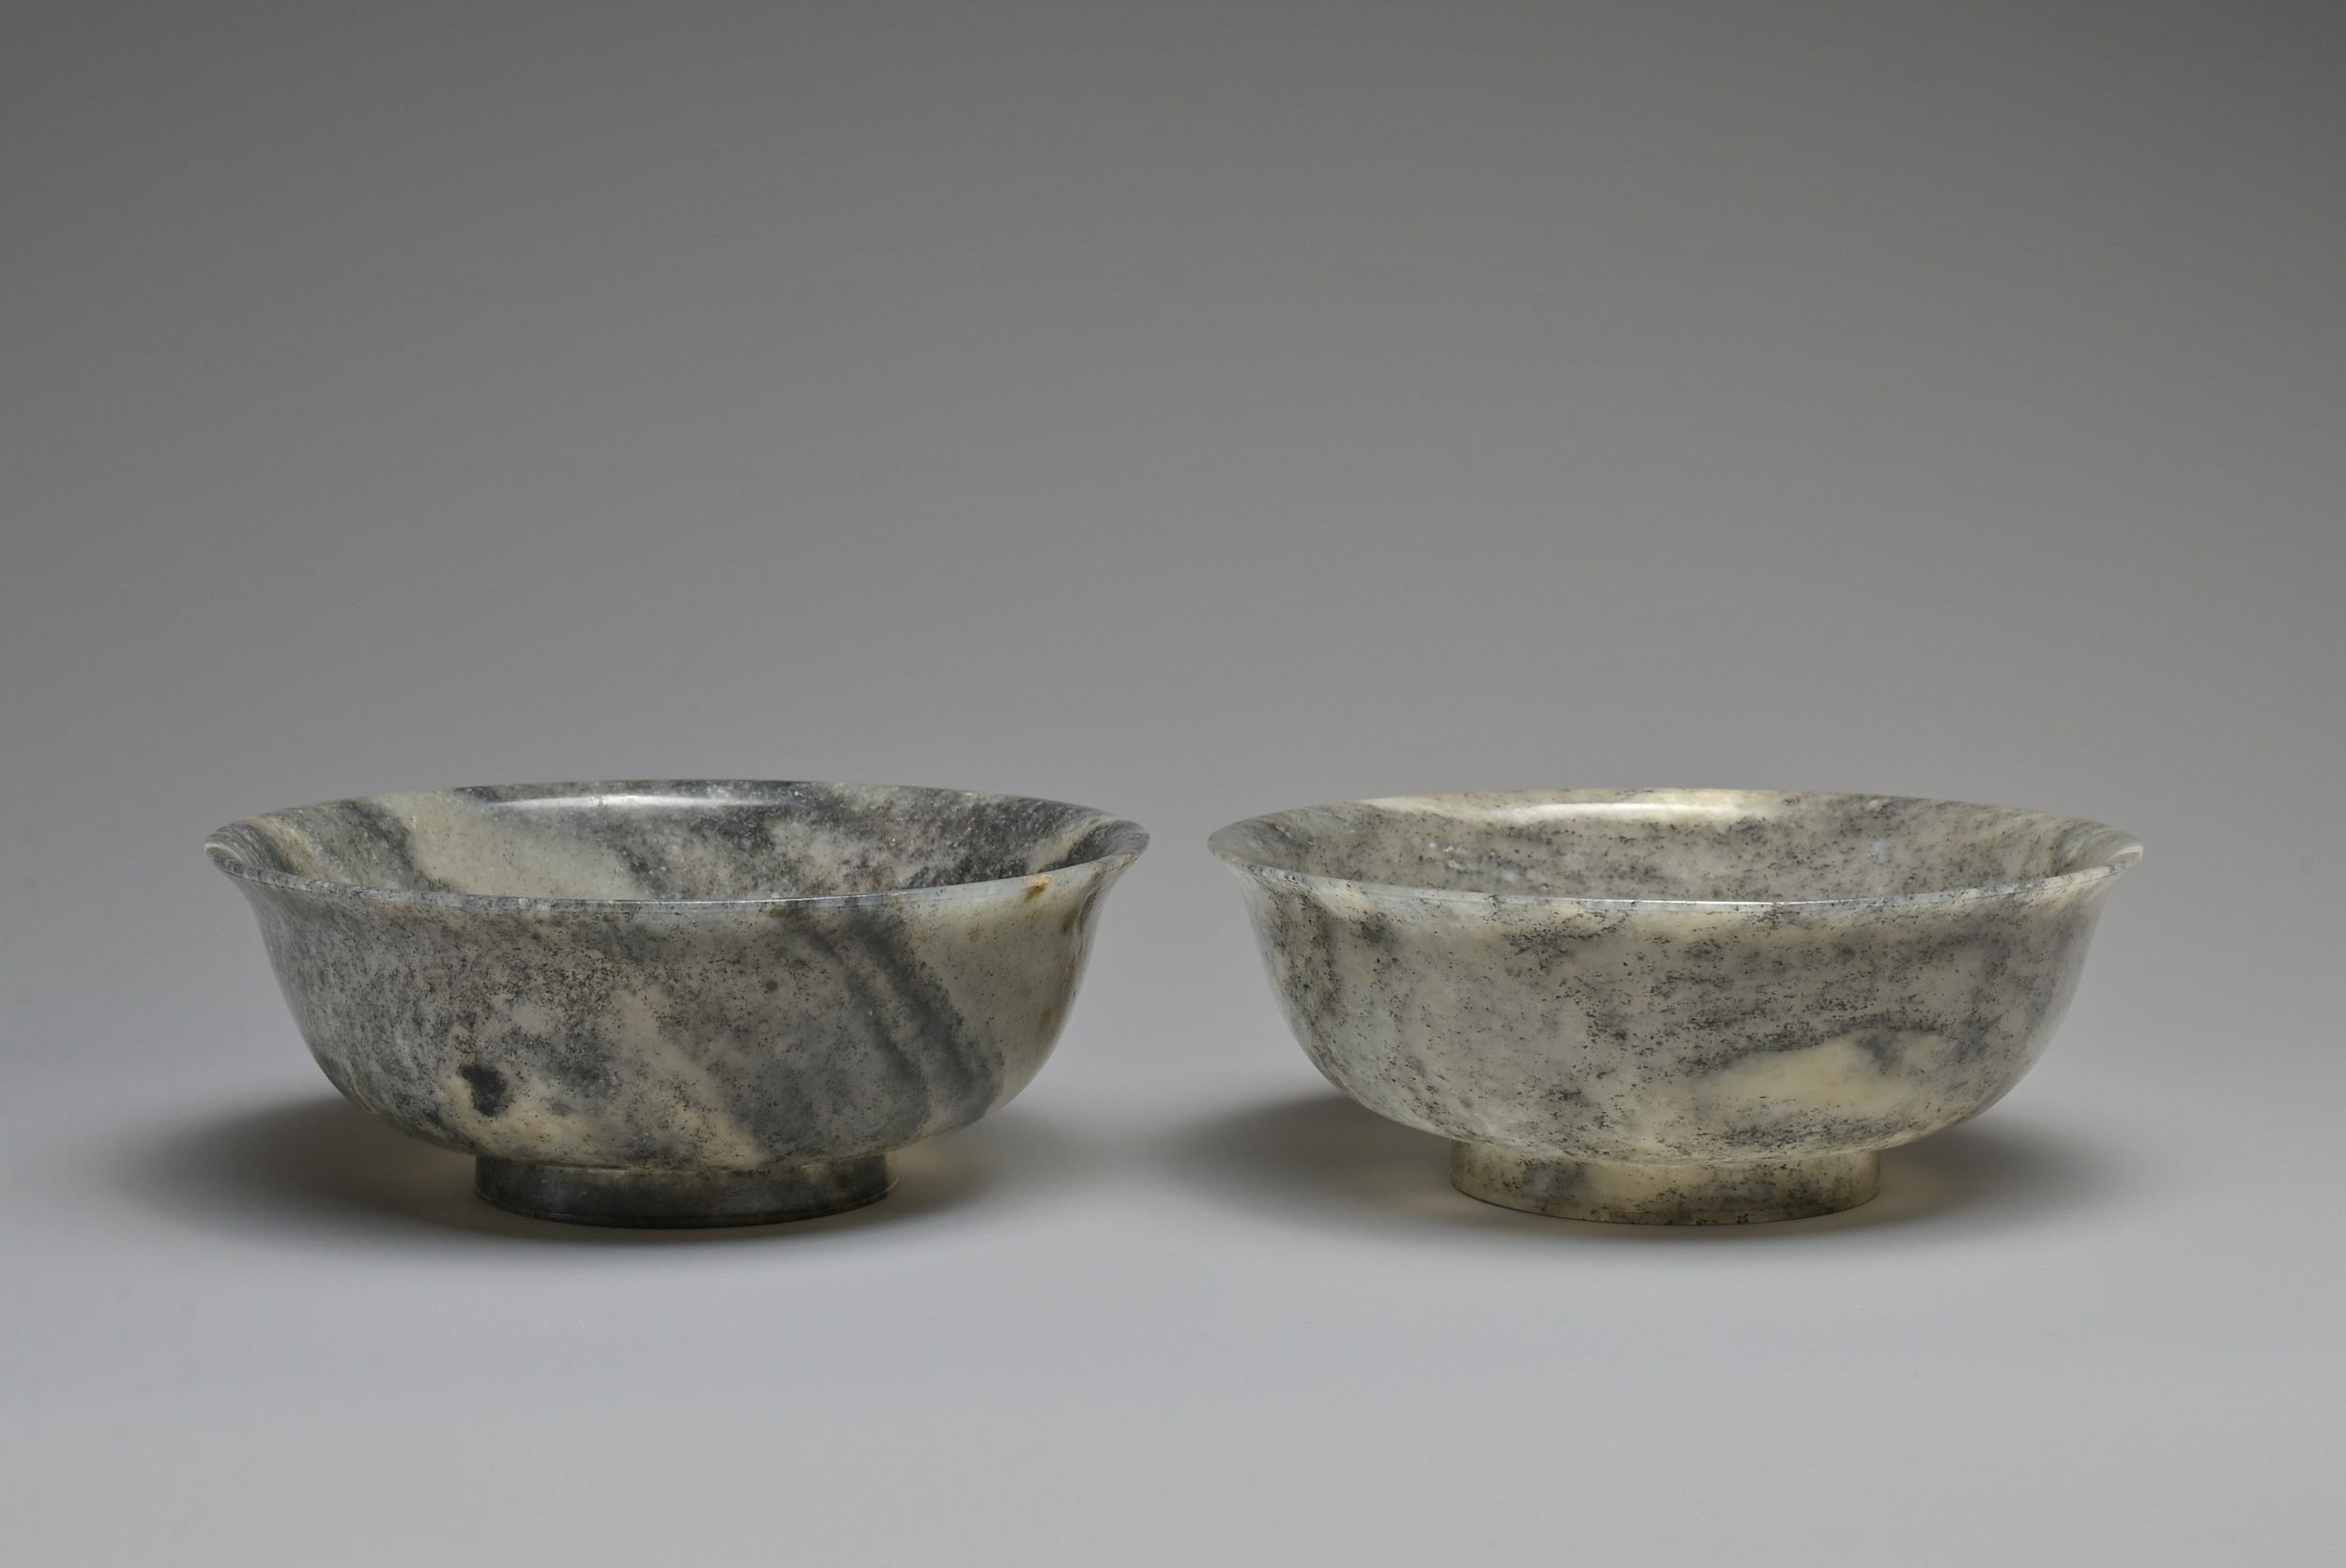 A FINE AND RARE PAIR OF CHINESE BLACK AND WHITE STRIATED NEPHRITE JADE BOWLS, 18/19TH CENTURY.